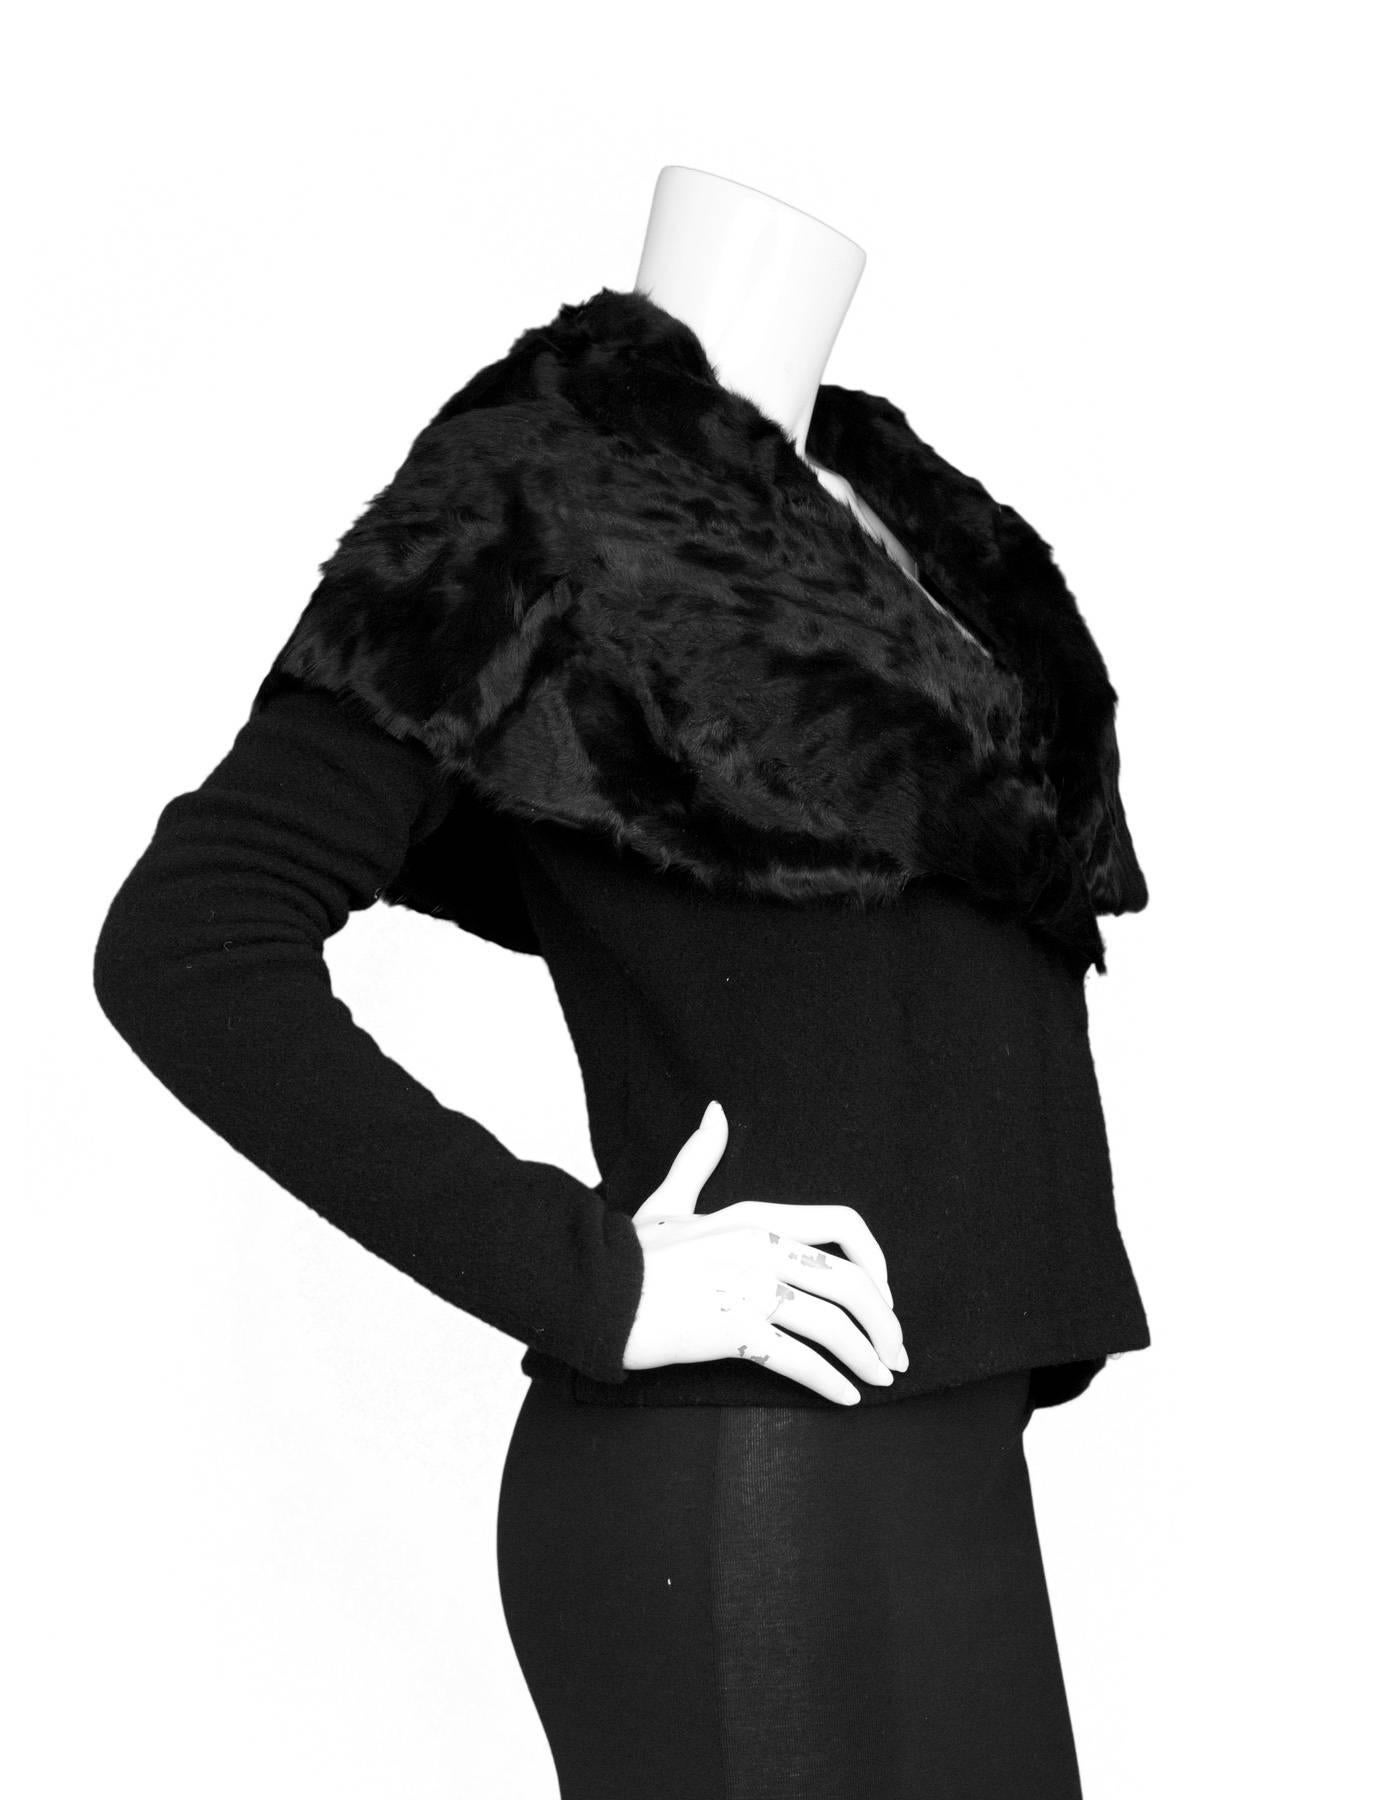 Ralph Lauren Black Cashmere & Fur Jacket 
Features fur shawl collar

Made In: Italy
Color: Black
Composition: 78% Wool, 22% cashmere
Lining: None
Closure/Opening: Double breasted snap closure
Exterior Pockets: None
Interior Pockets: None
Retail